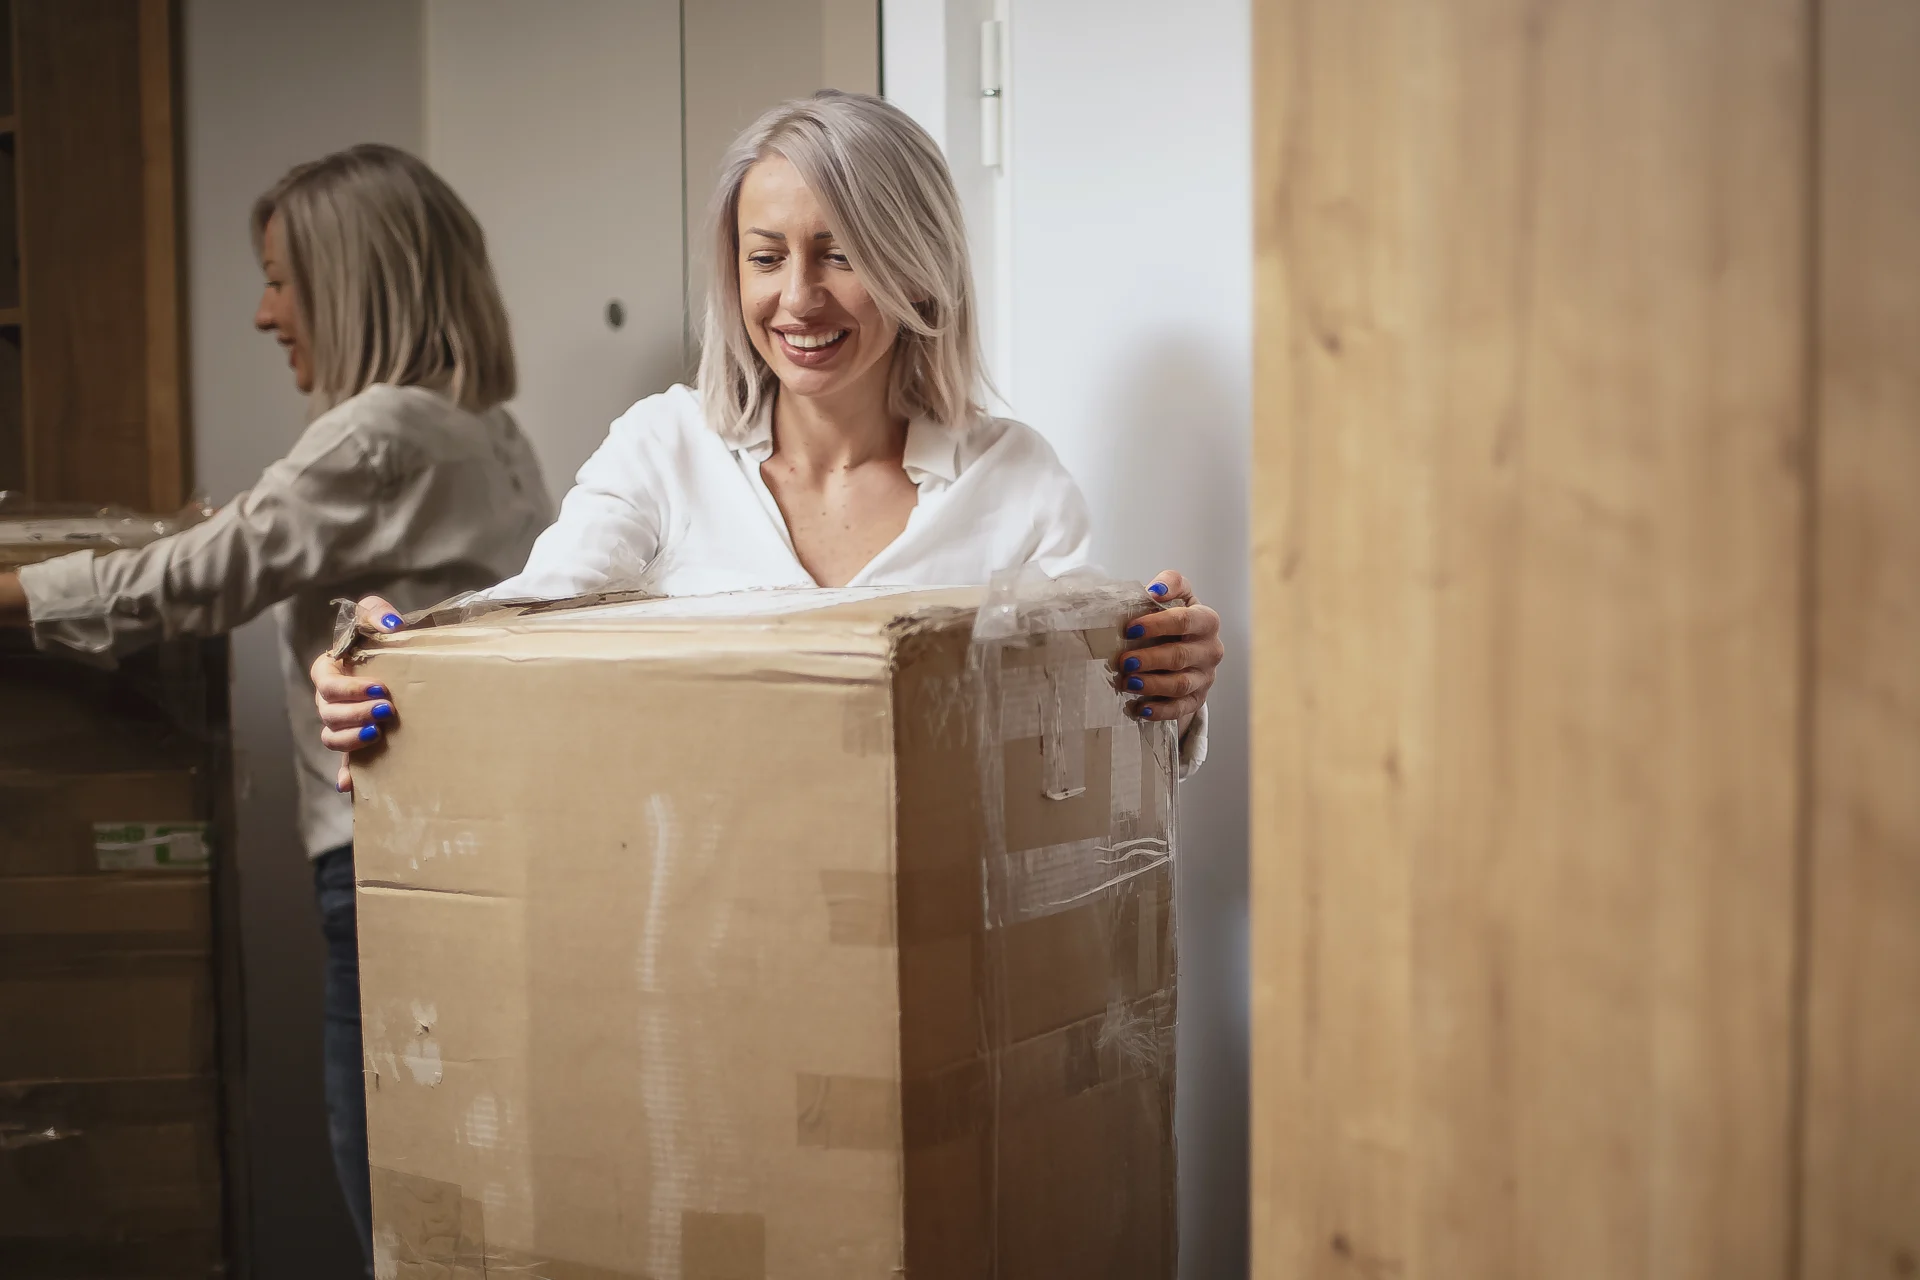 Woman with a smile and blue nail varnish moving a large boxed package